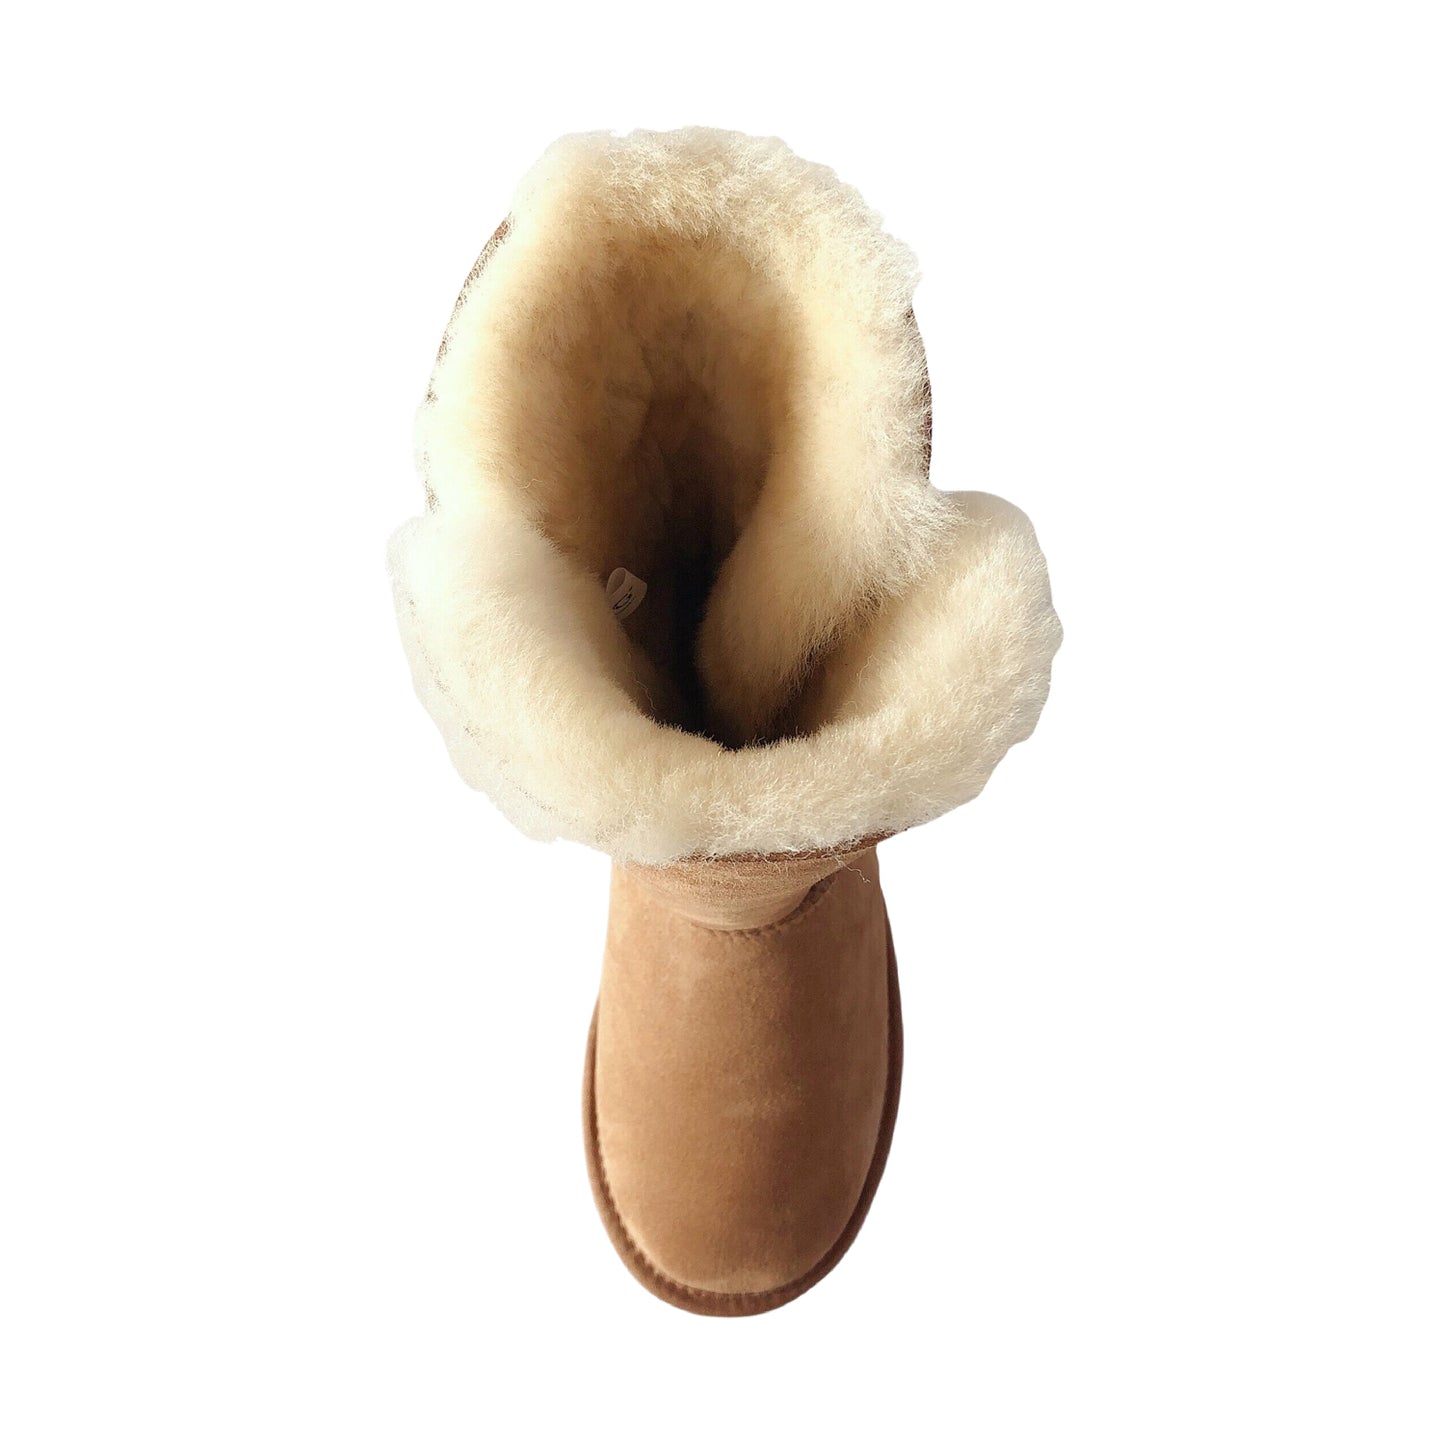 UGG Tall Classic 3 Button Boots